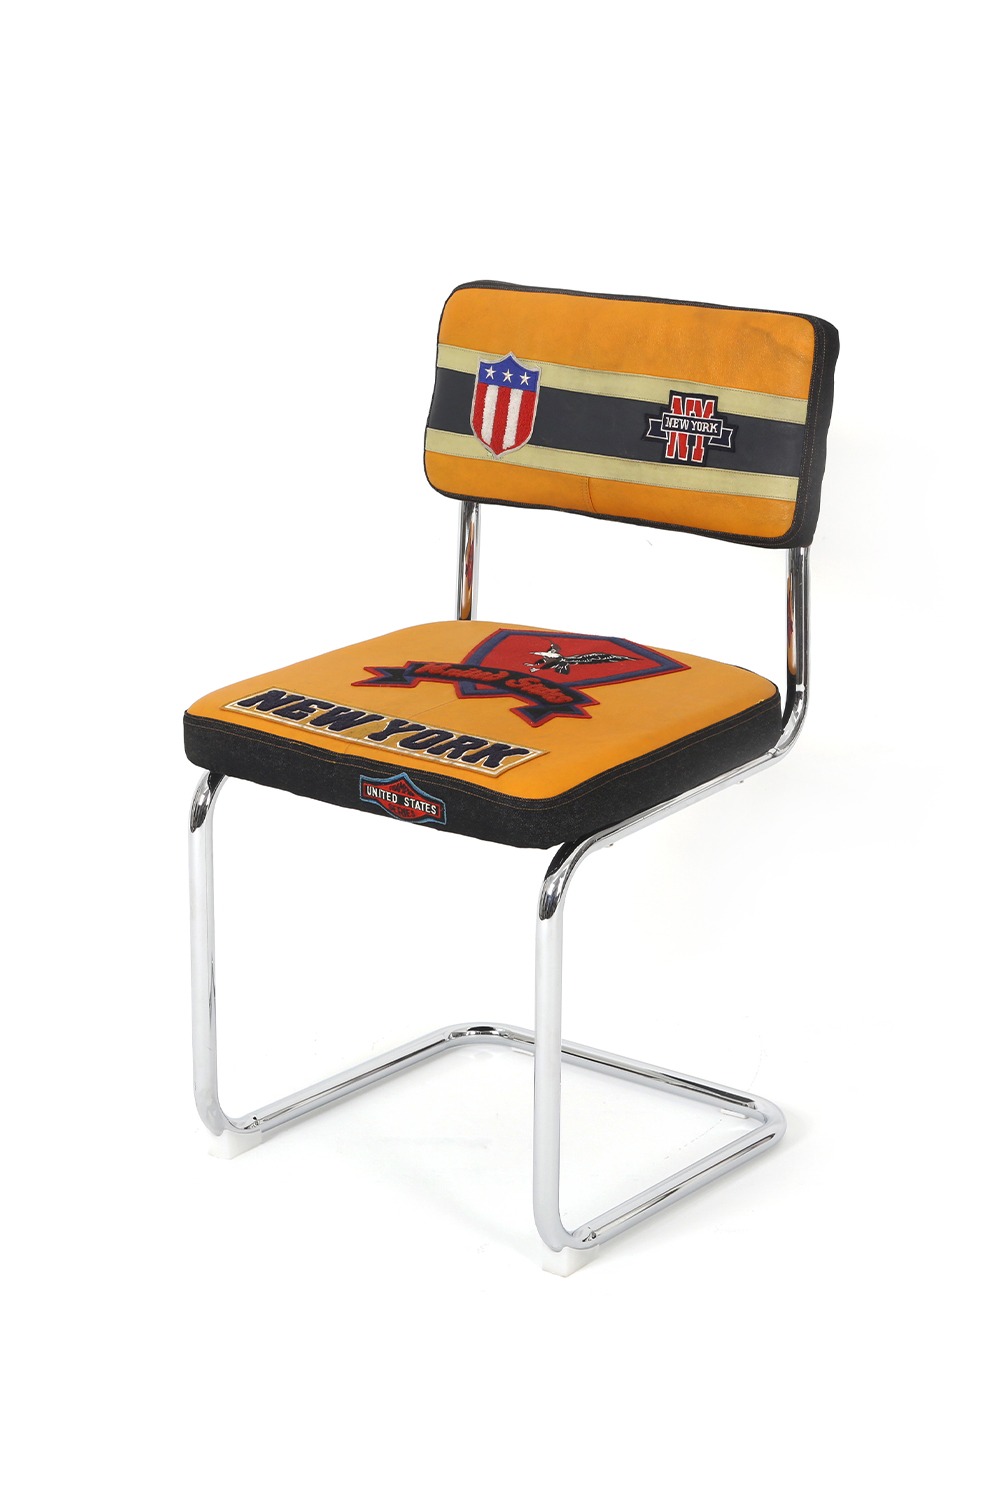 Chair C2 type 003 - Deconstructed NY Racing Jacket Single Chair